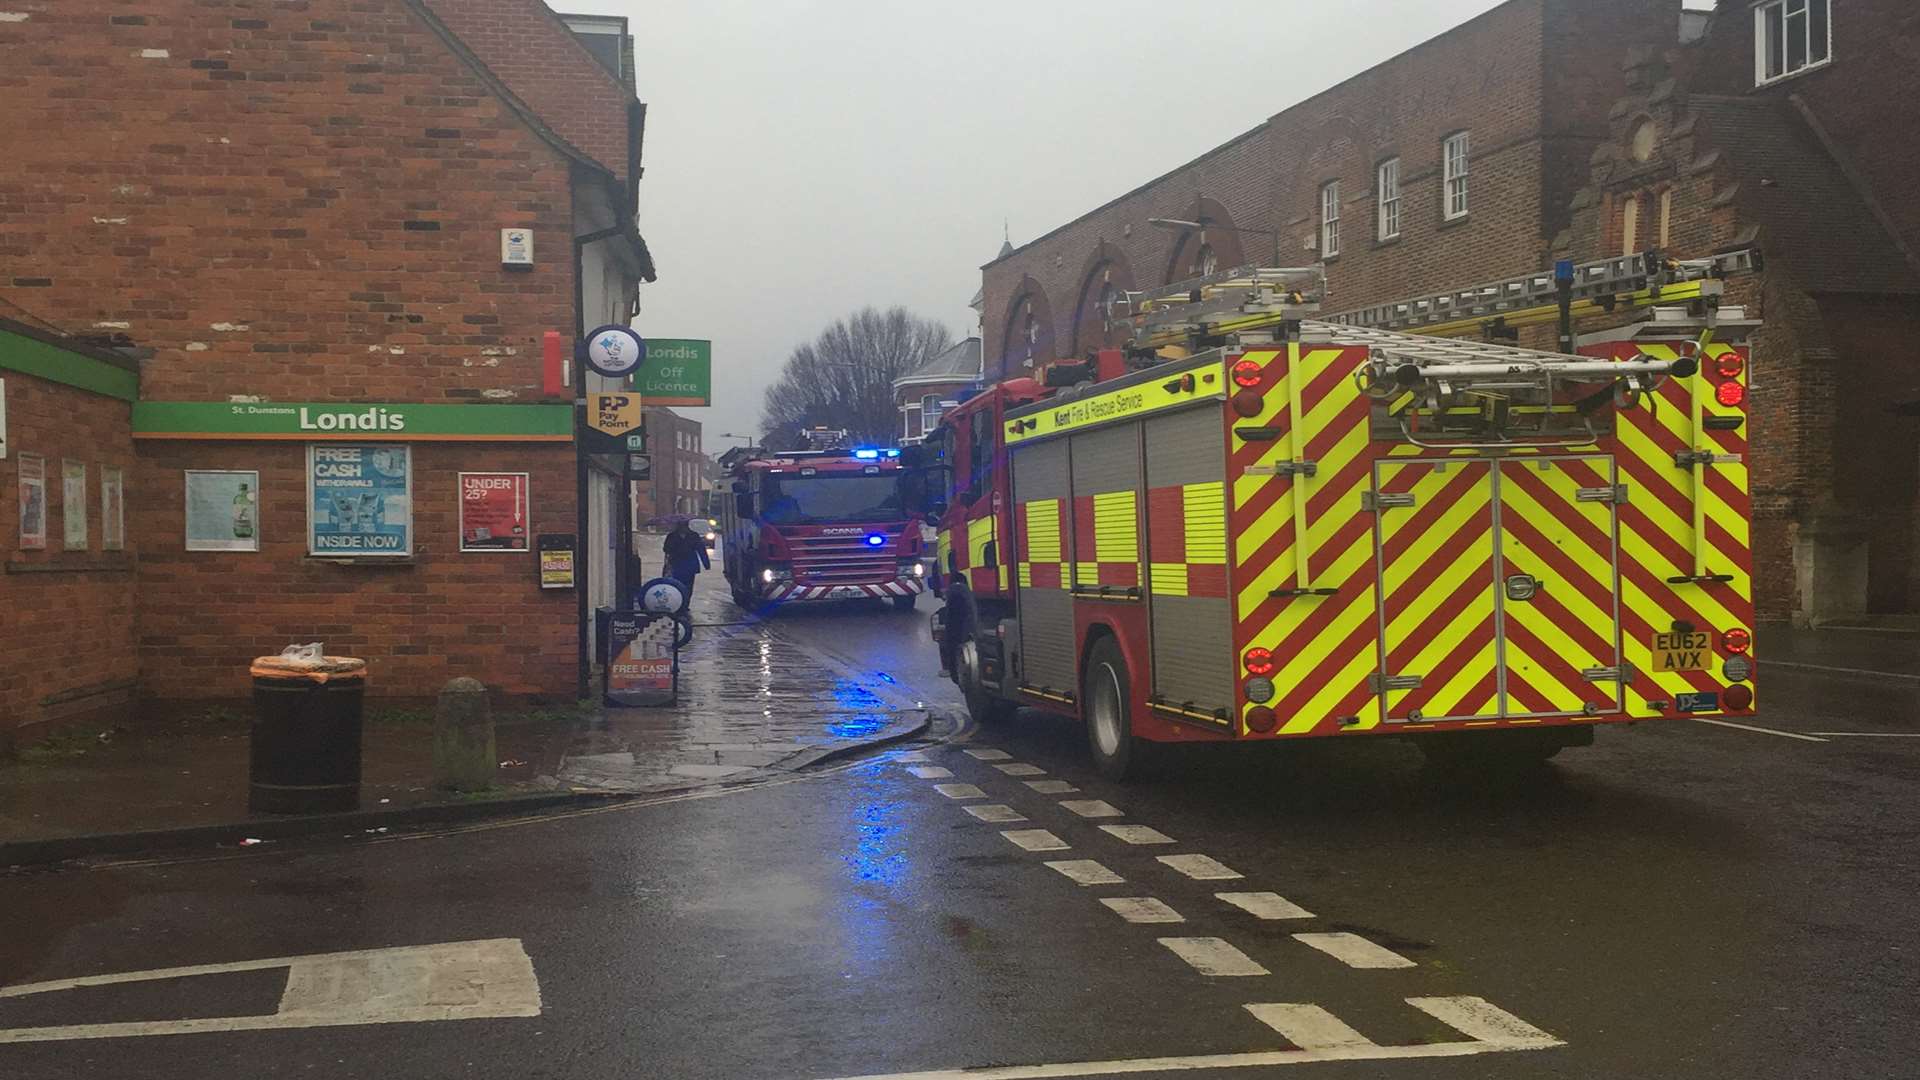 Fire crews at Londis in St Dunstan's, Canterbury